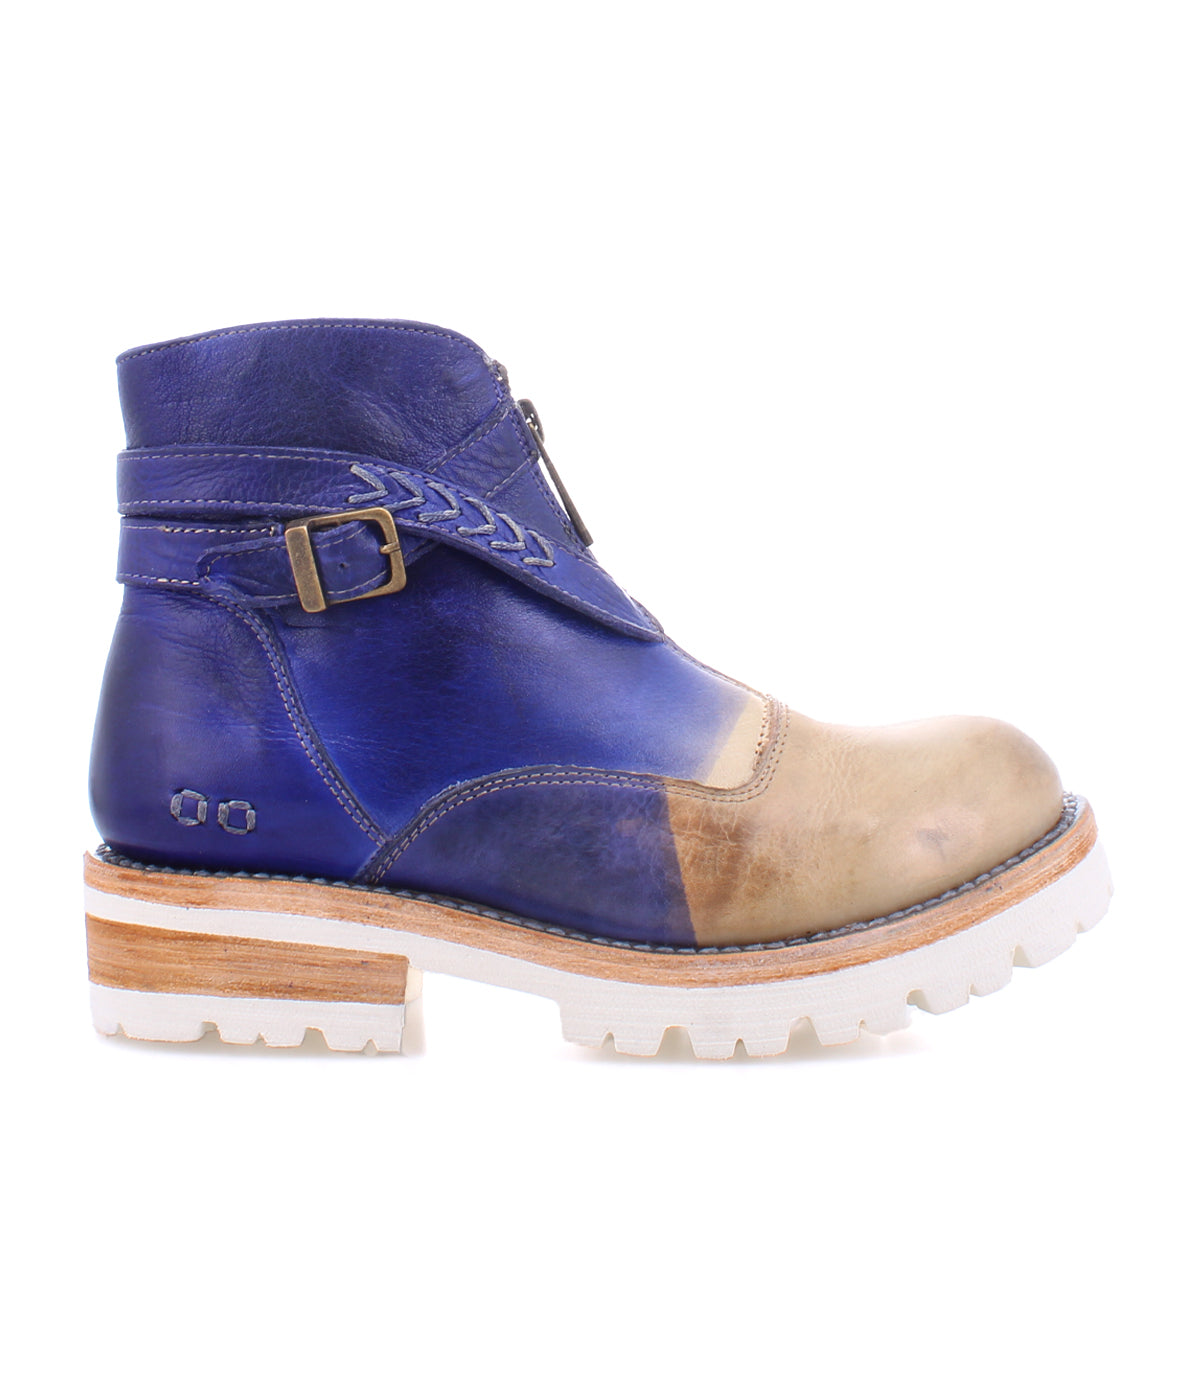 A lightweight blue leather ankle boot with crisscross straps and a white sole, called the Dessa made by Bed Stu.